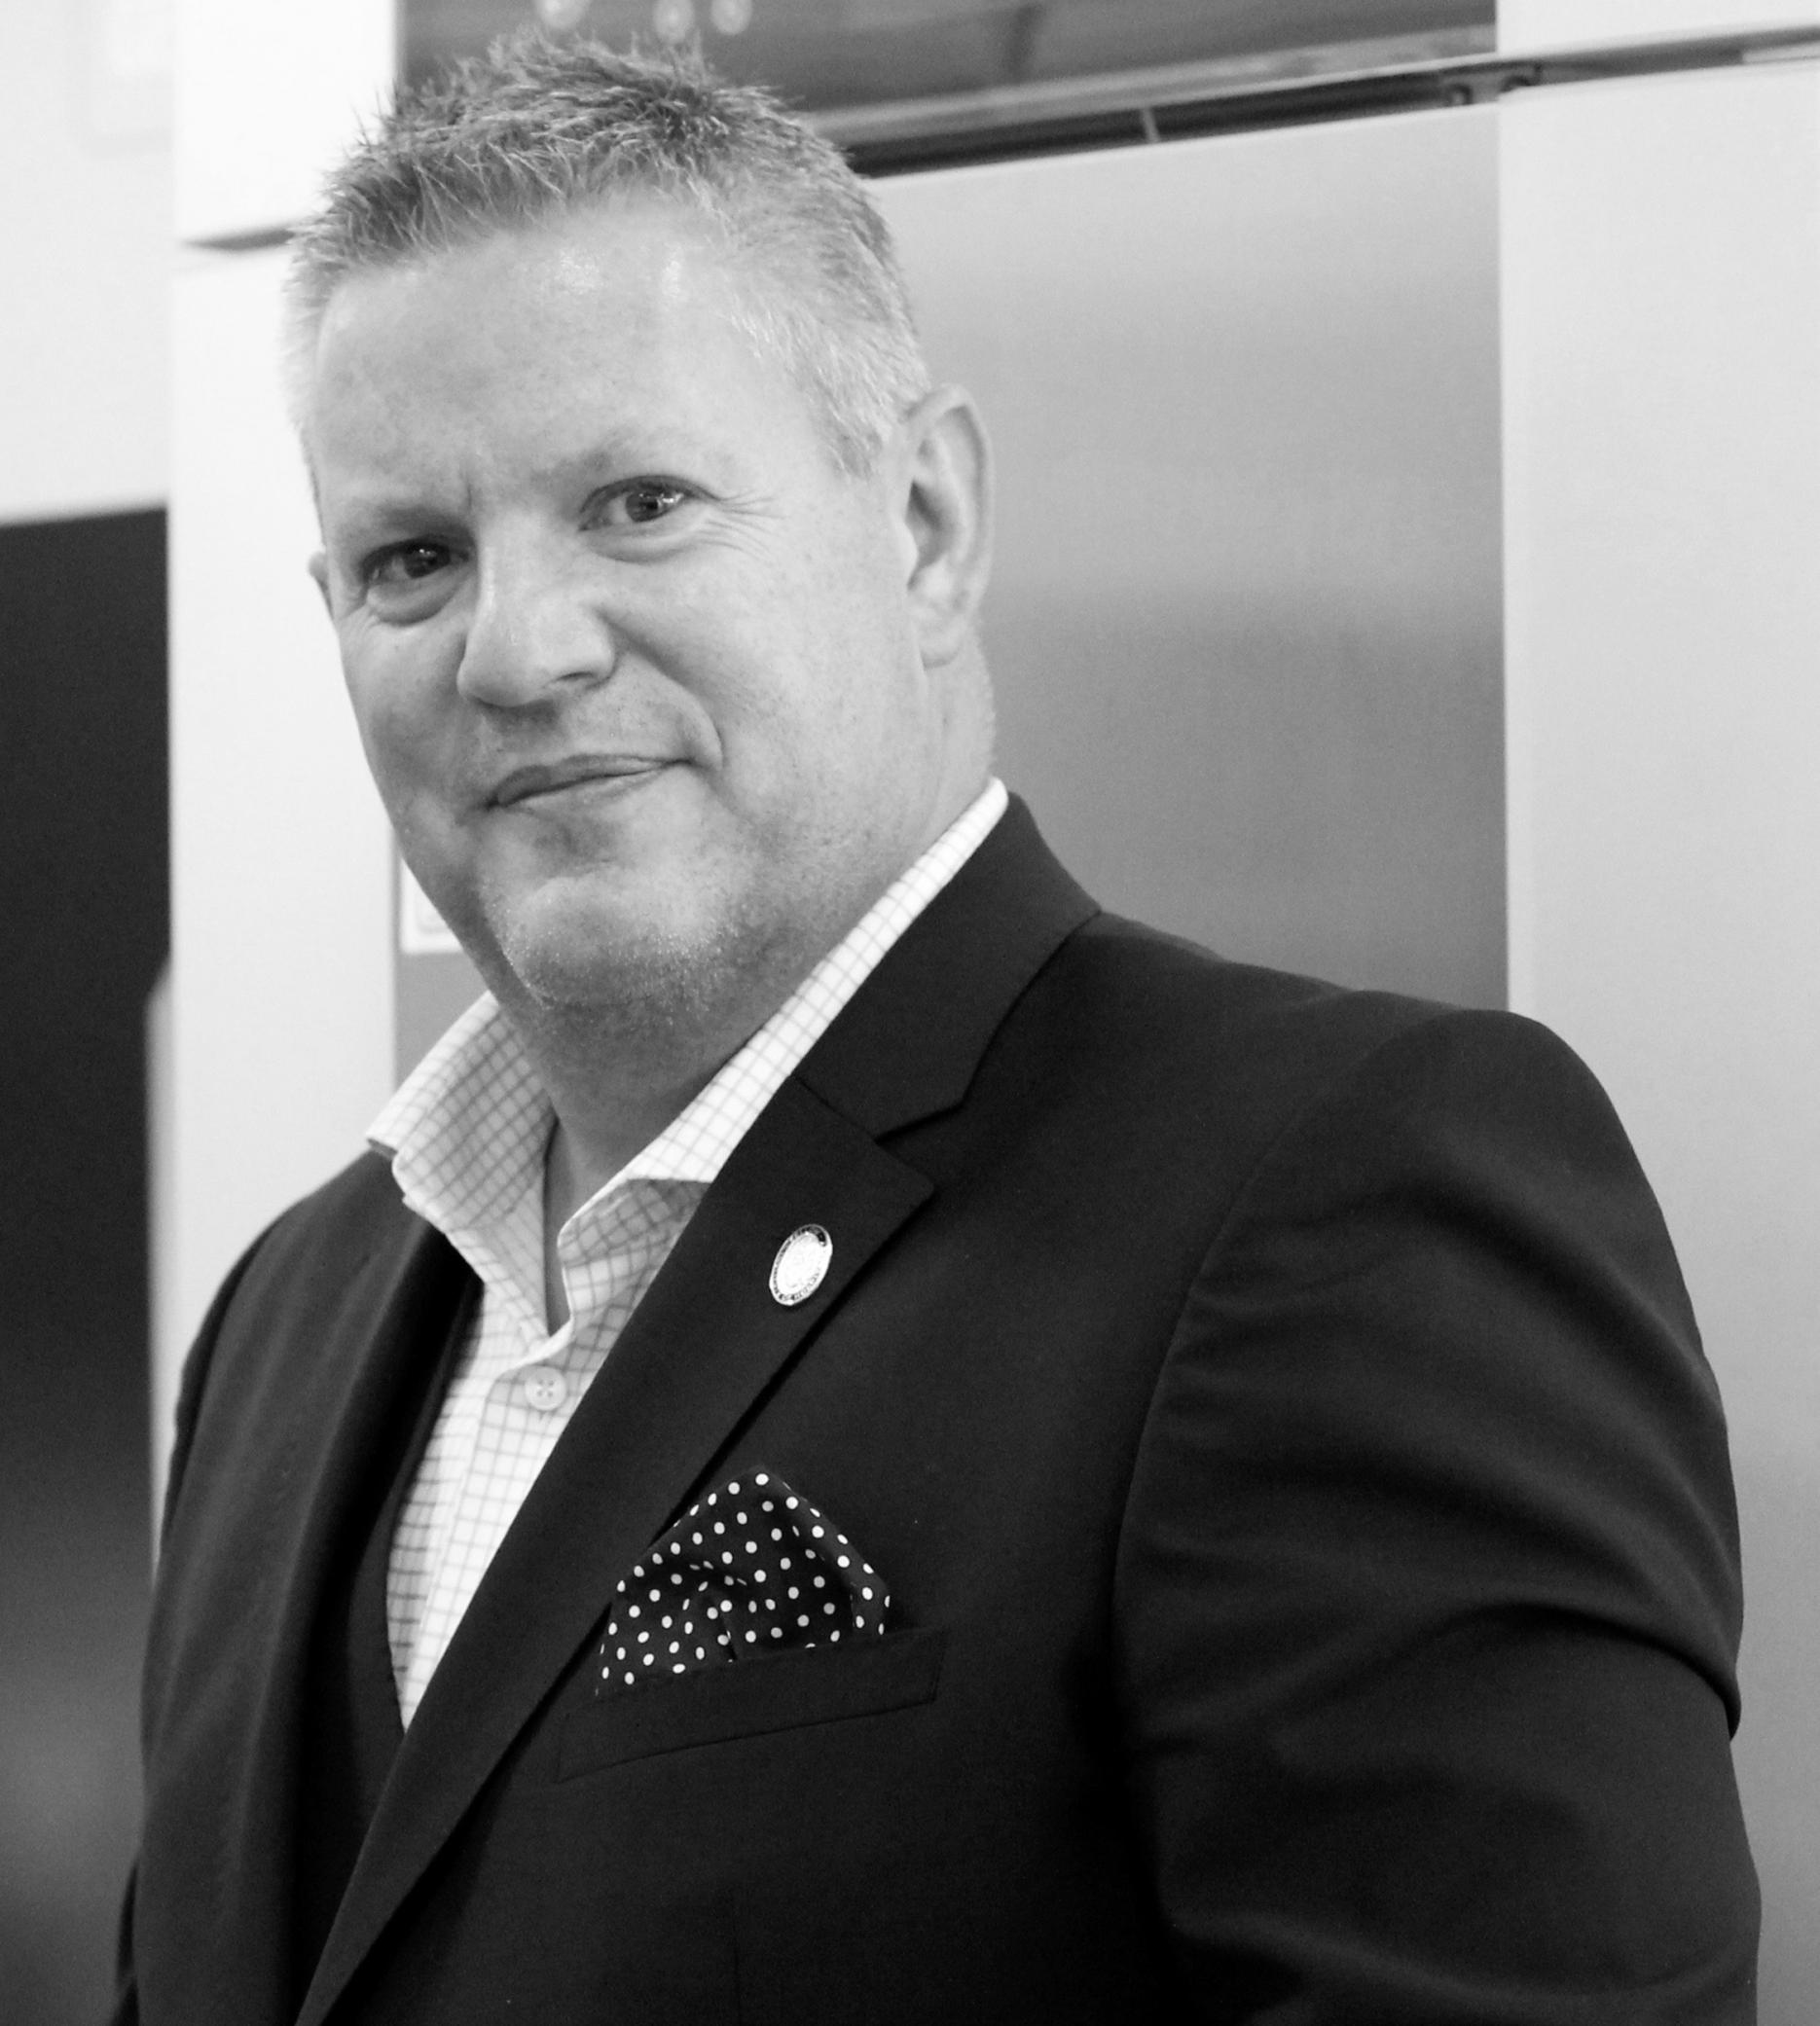 Meiko appoints new managing director